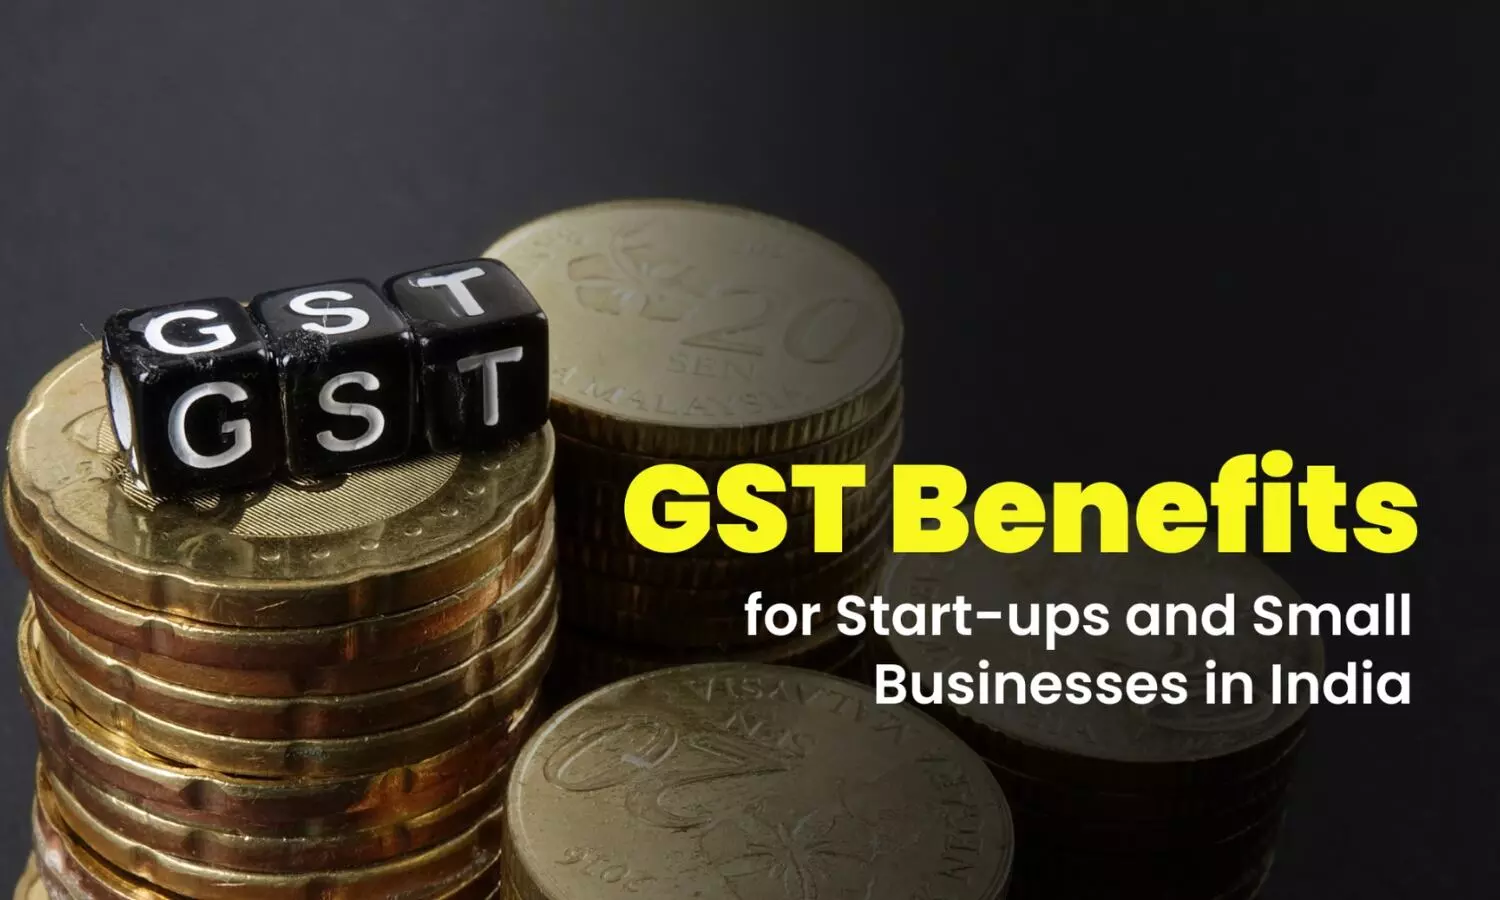 GST Benefits for Start-ups and Small Businesses in India